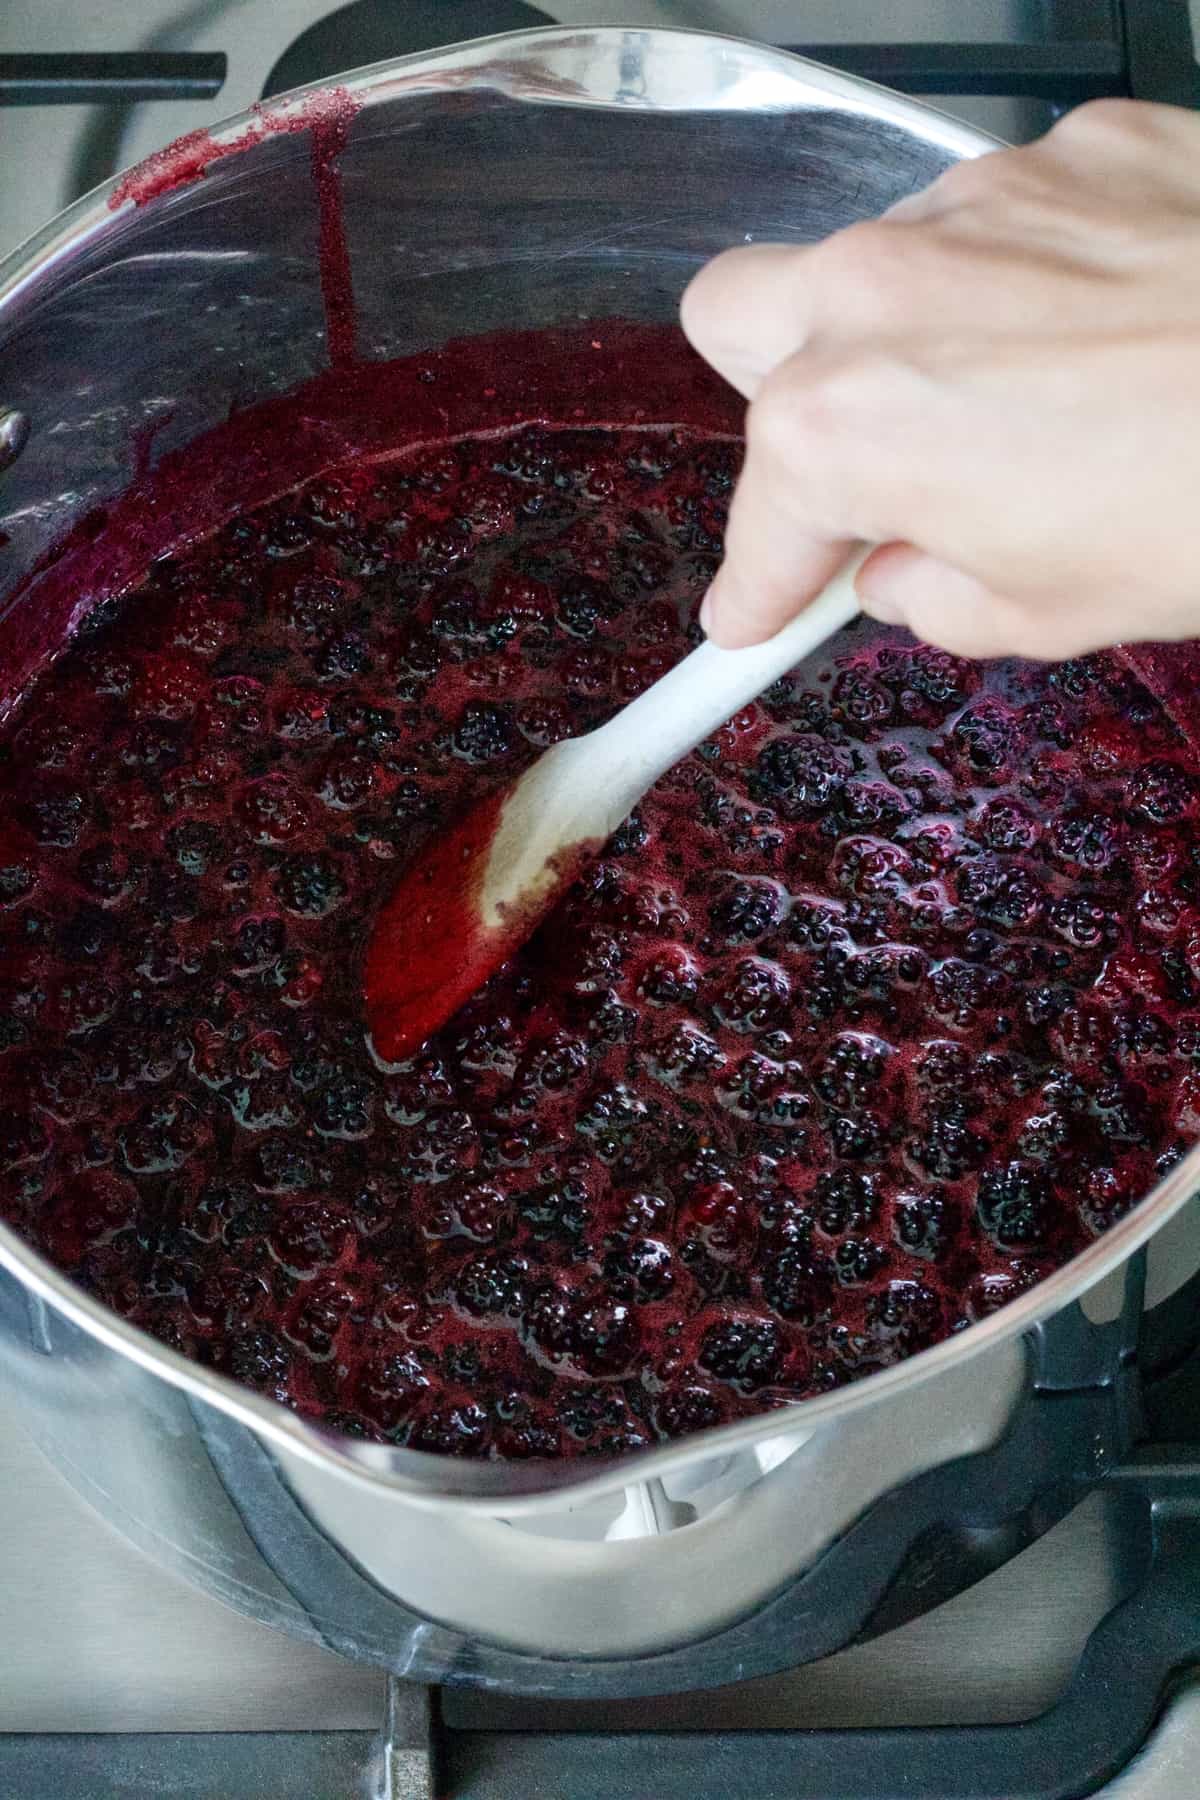 Hand stirring jam mixture in a pan with wooden spoon.